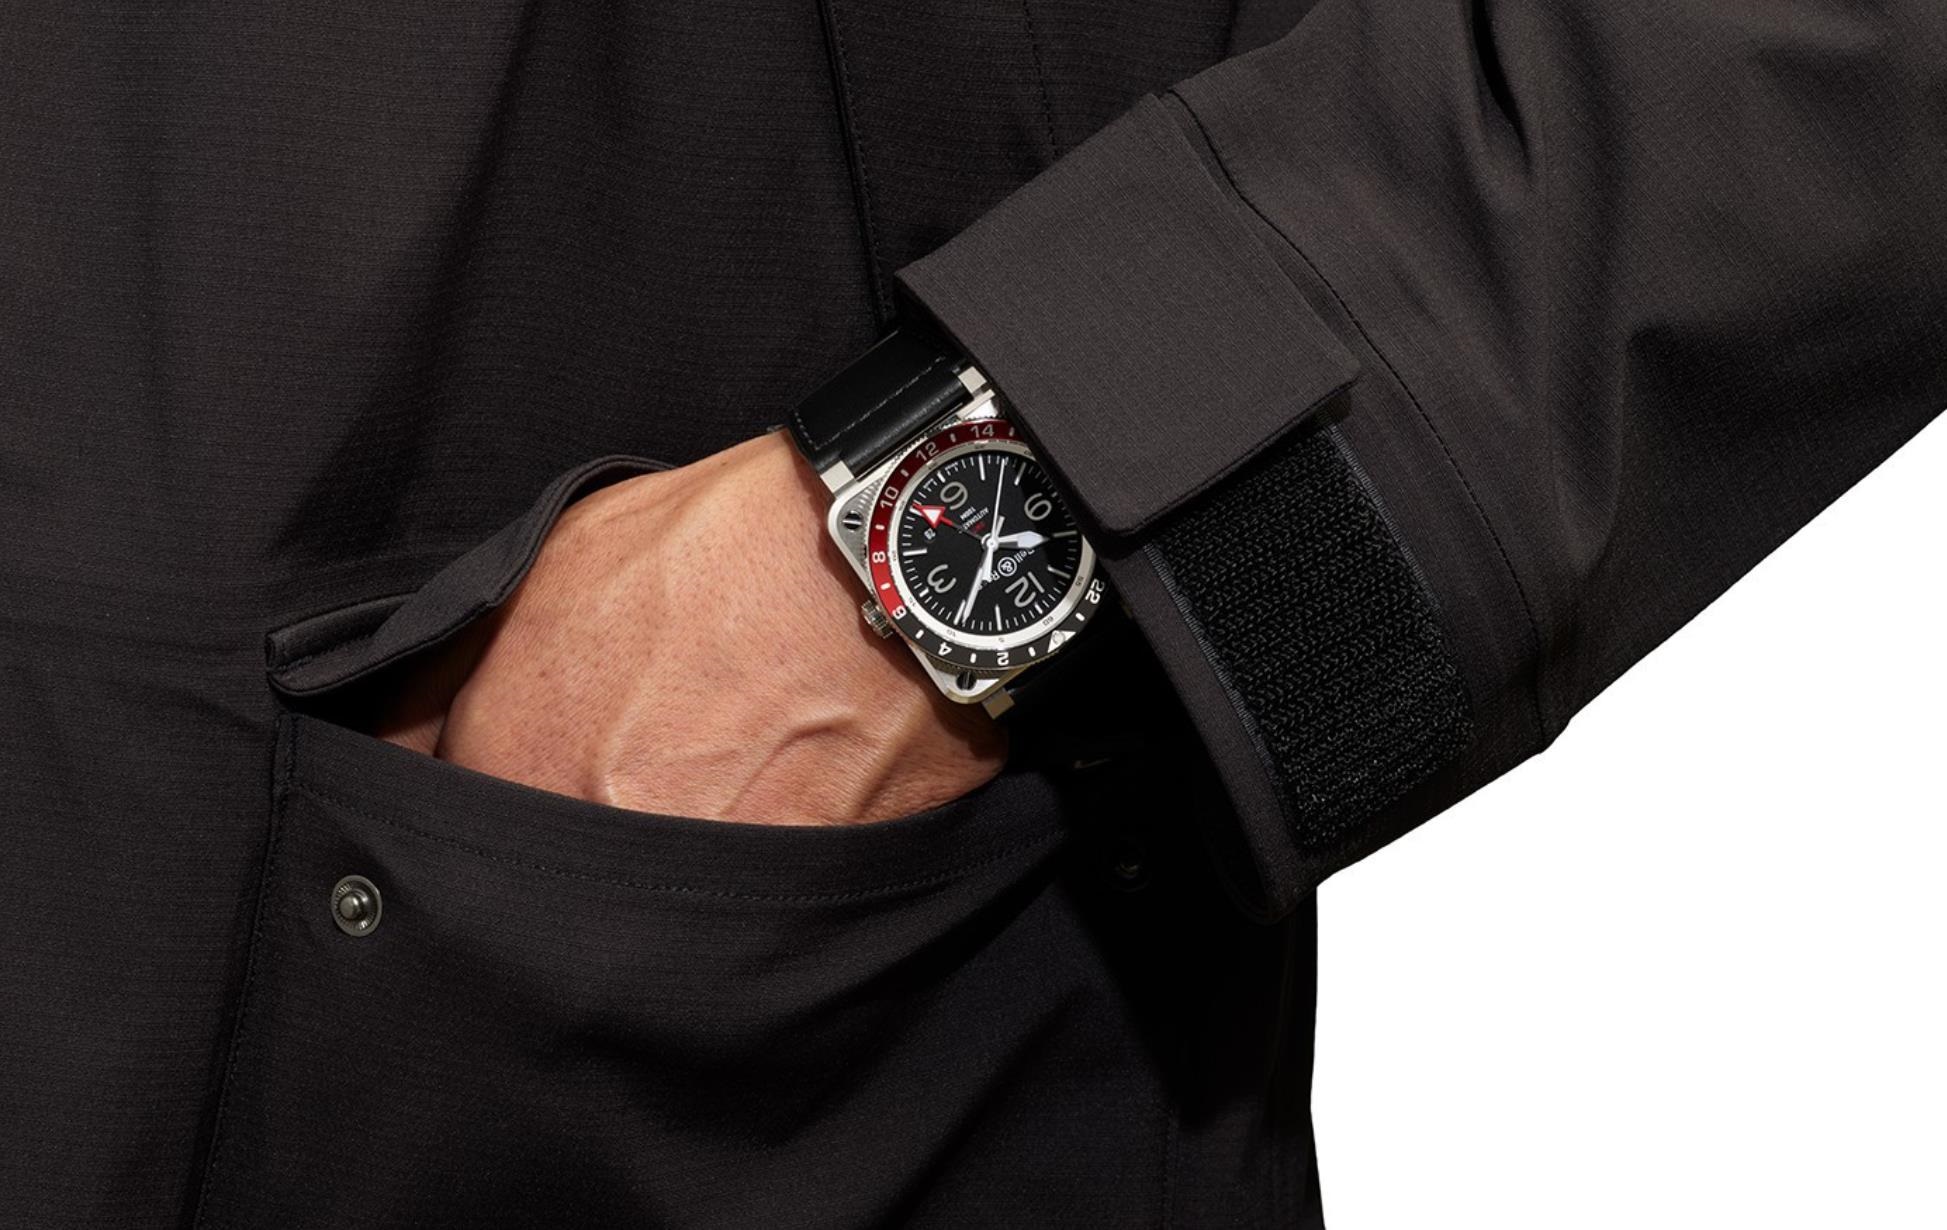 The Swiss made fake Bell & Ross watch has black dial.